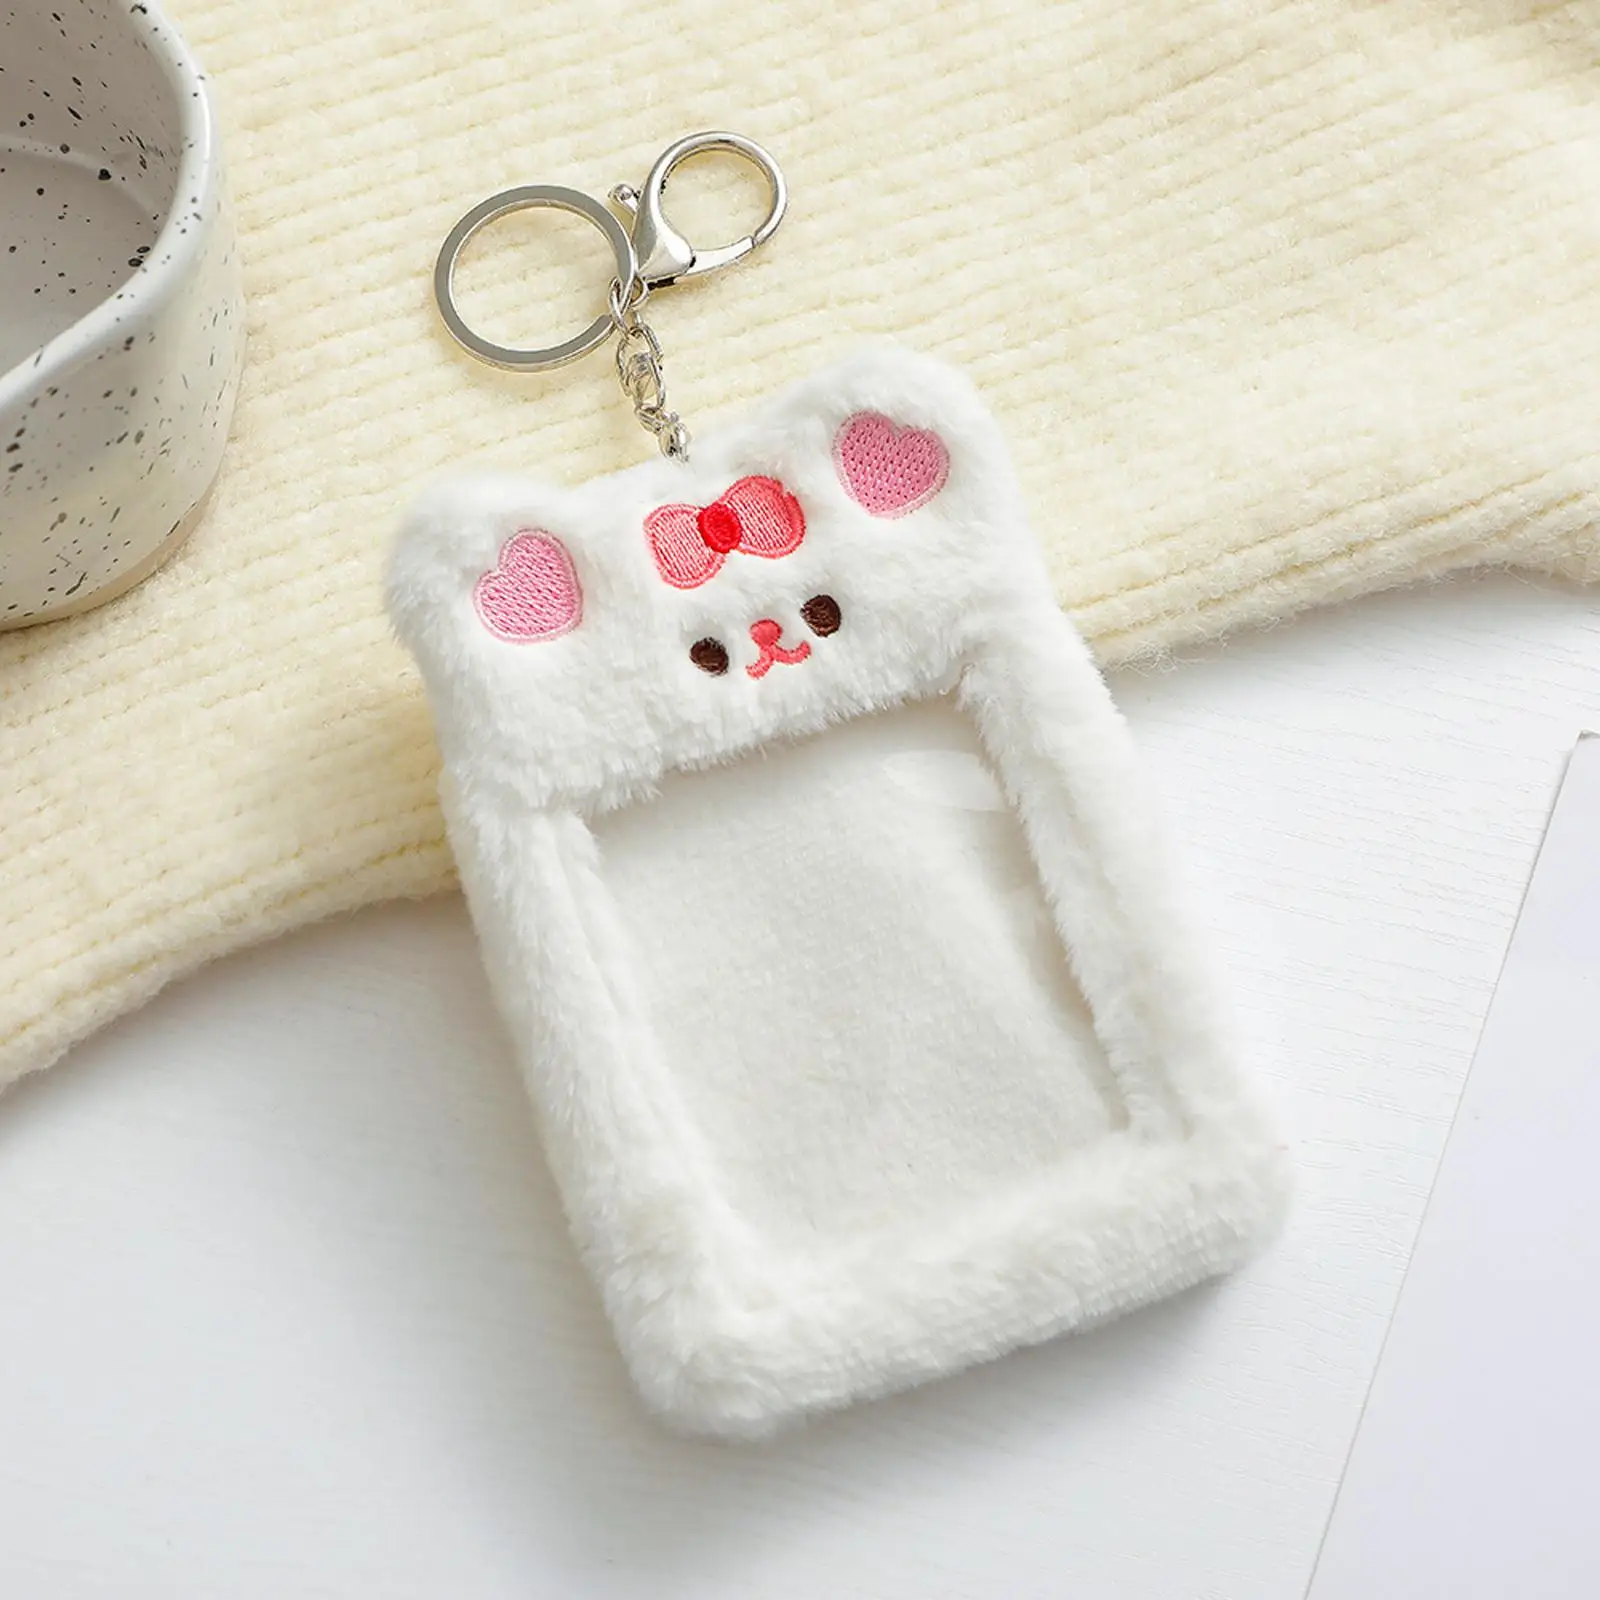 Plush Photocard Holder Portable Pendant Decor Photo ID Card Cover for Women Bank Cards